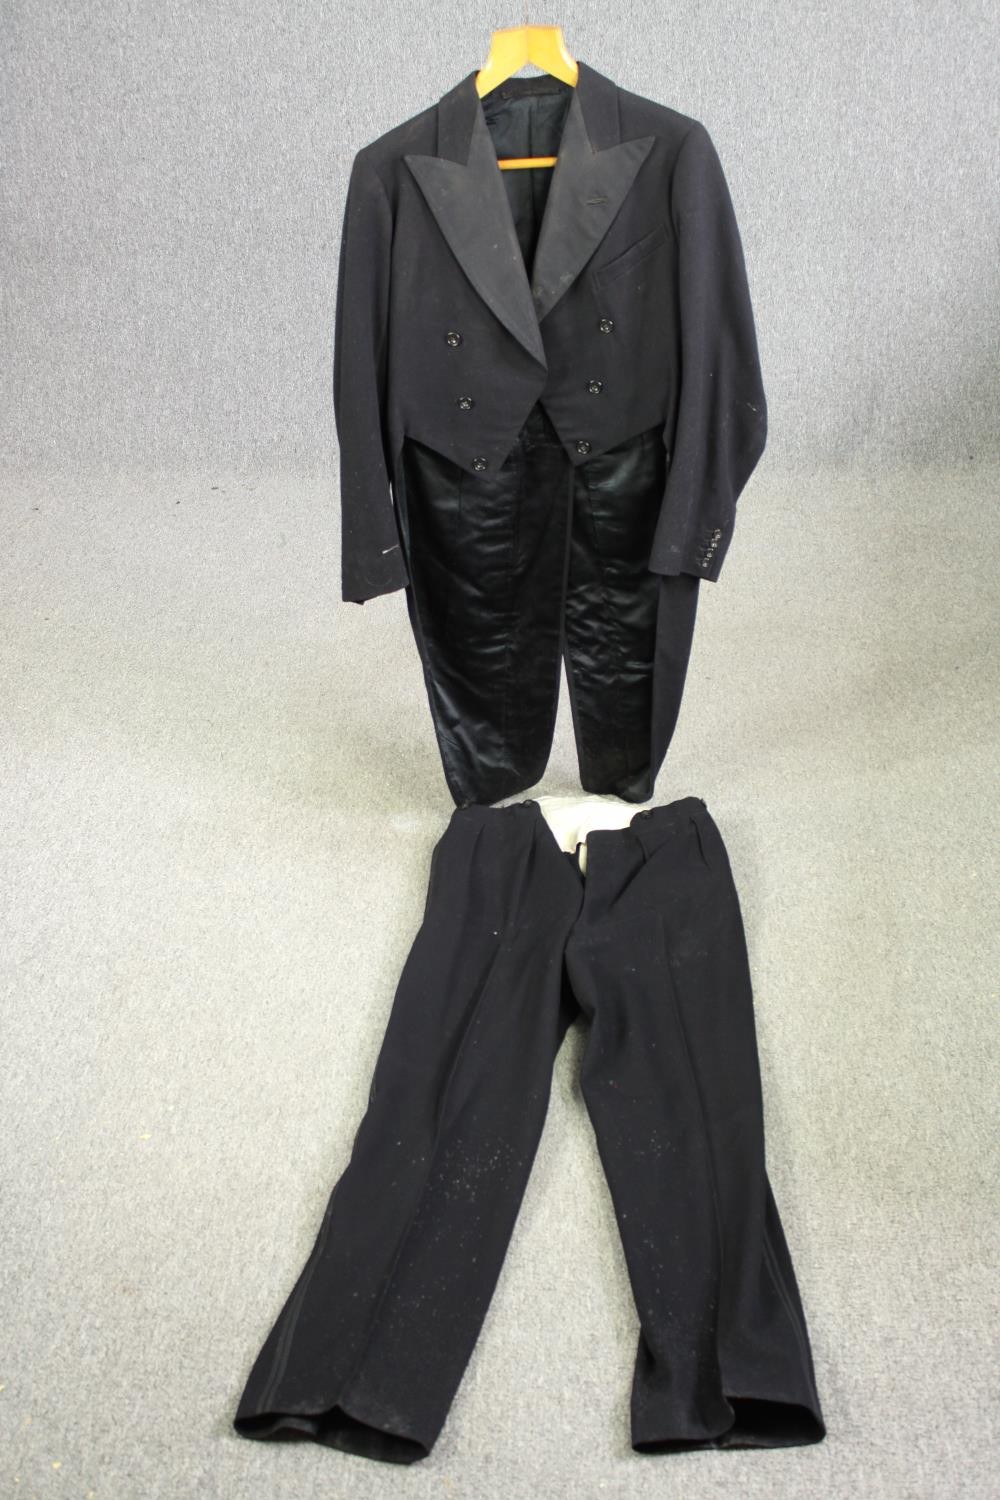 A British army tailcoat outfit.